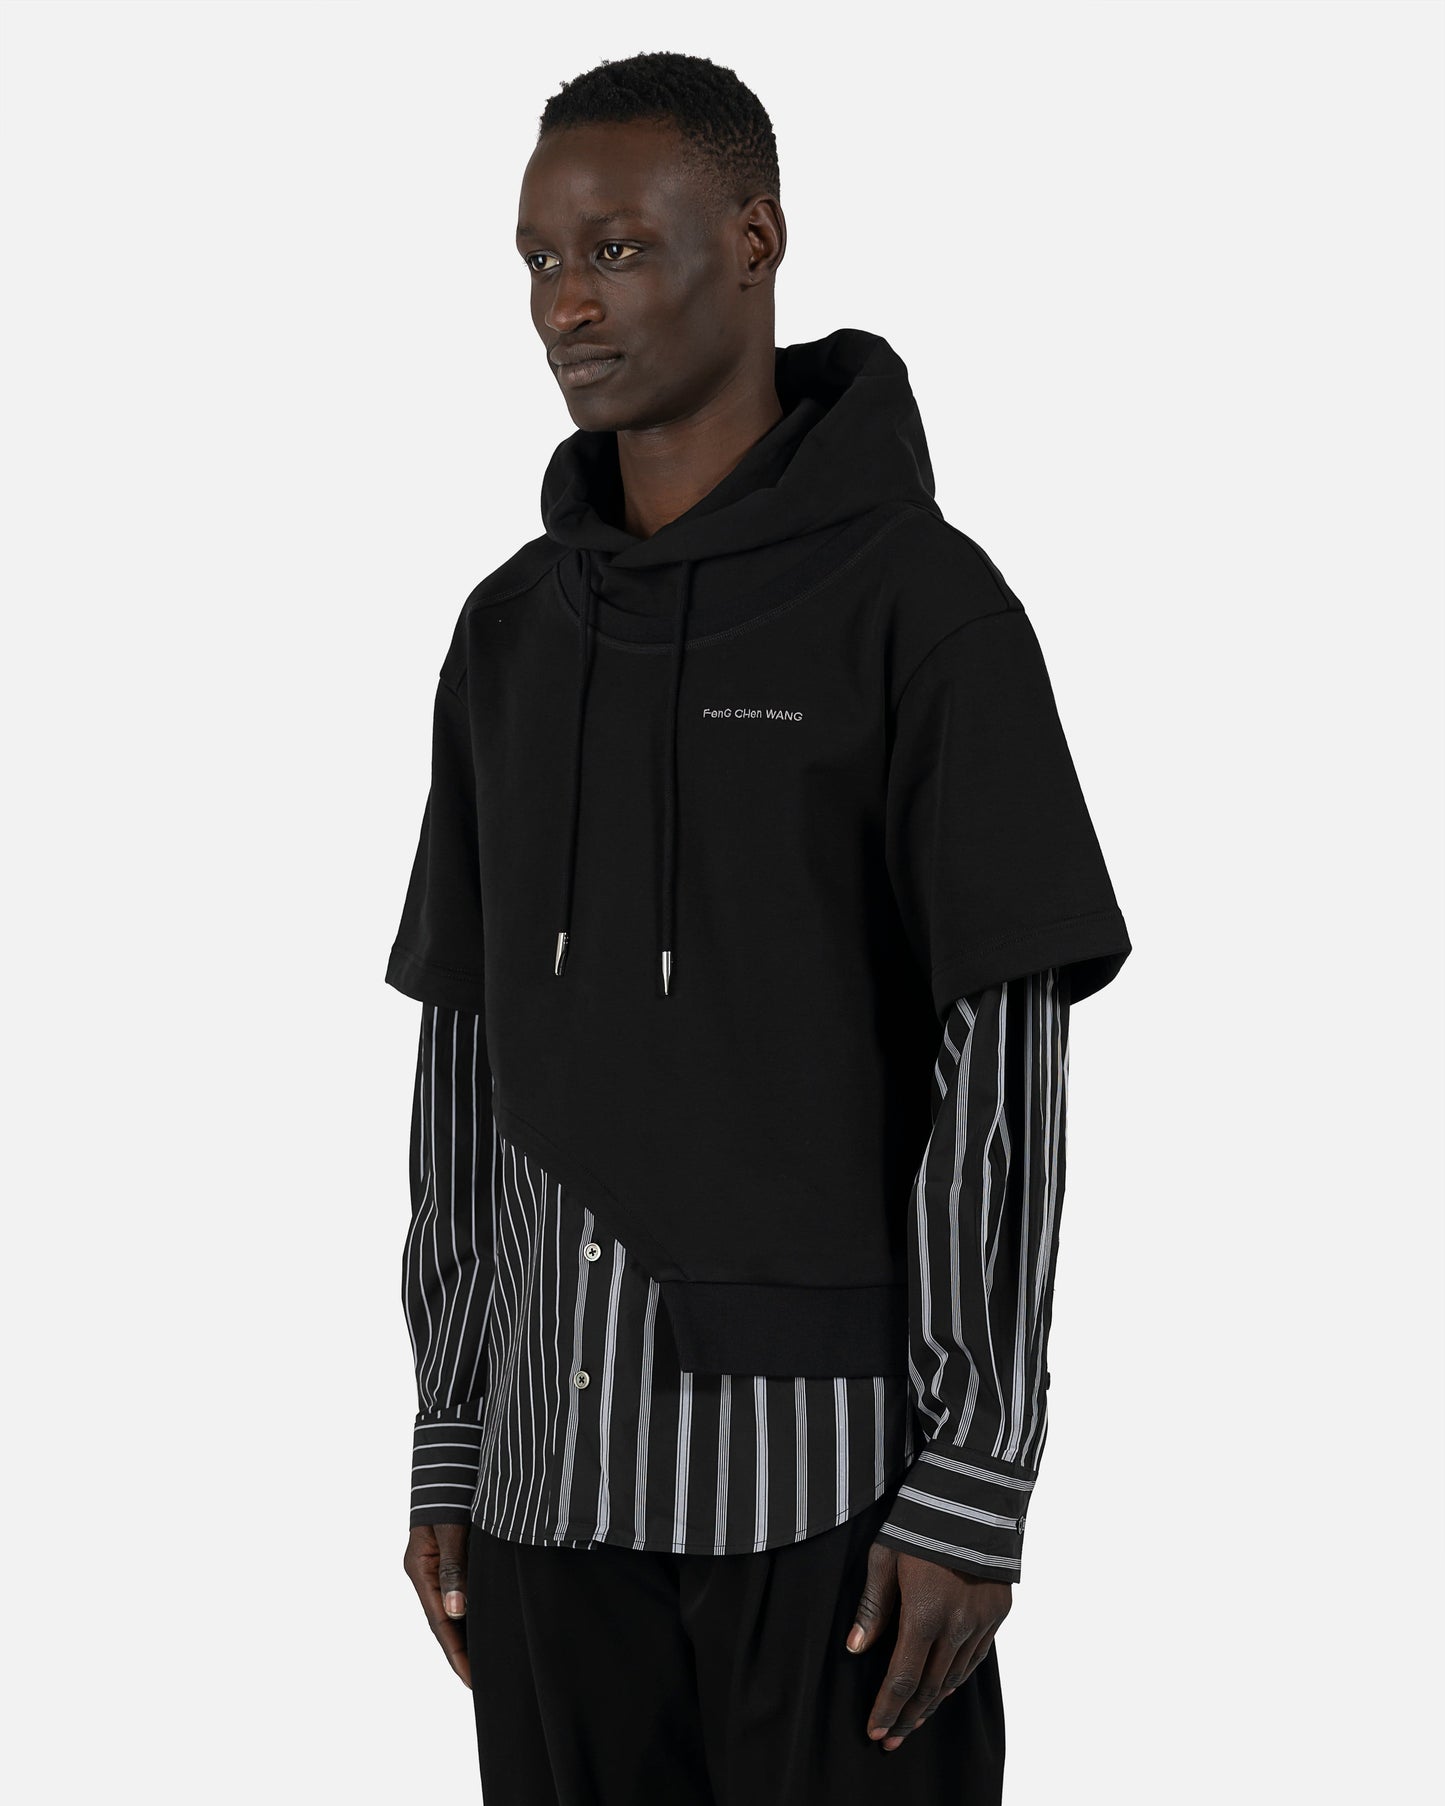 Feng Chen Wang Shirting Panelled Hoodie in Black/Multi